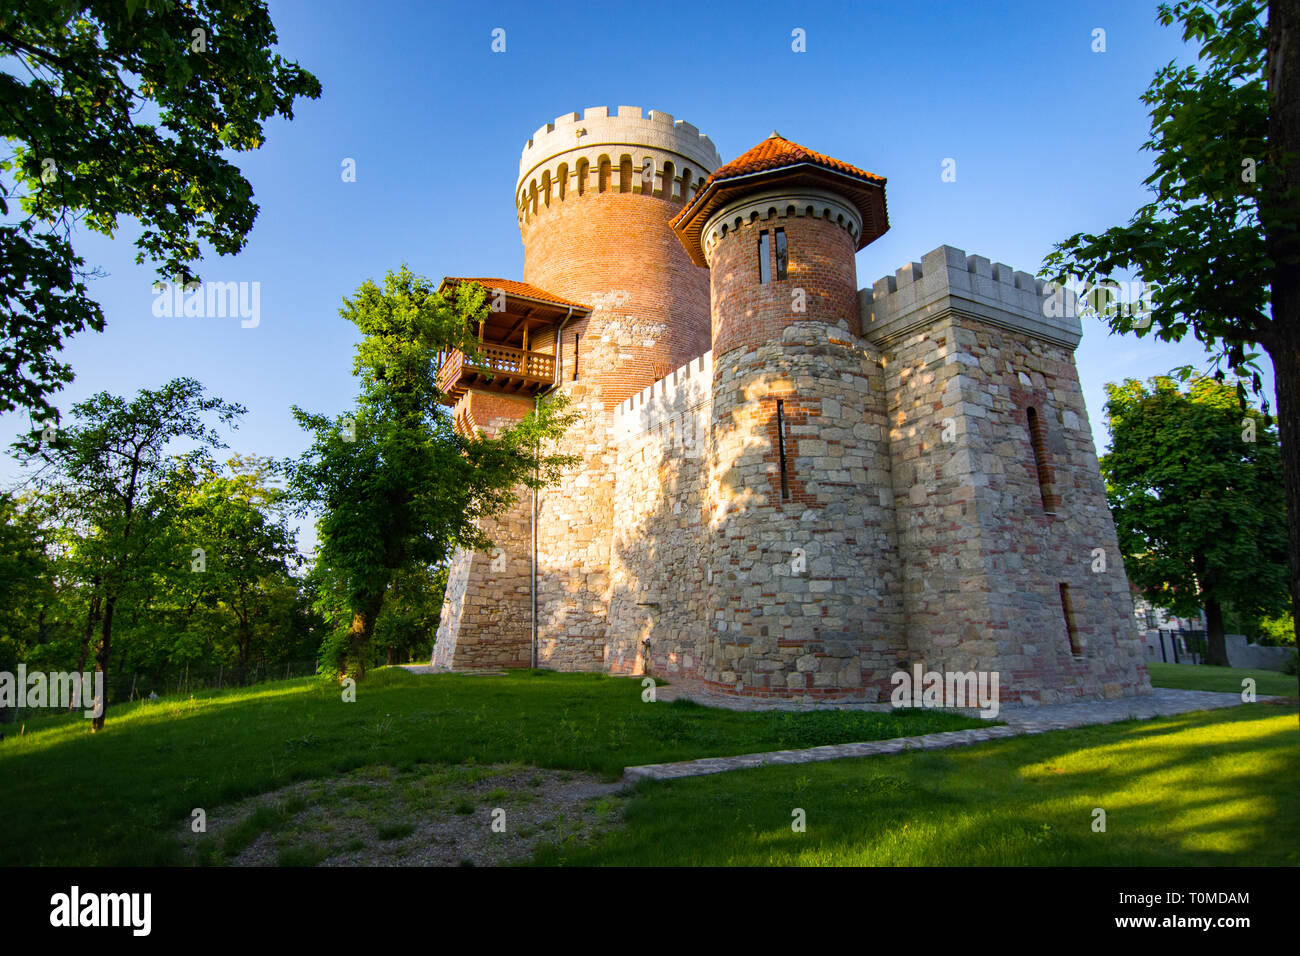 Atmospheric architecture of Vlad Tepes castle in Bucarest's Carol park. A place filled with a lot of medieval history and myth Stock Photo